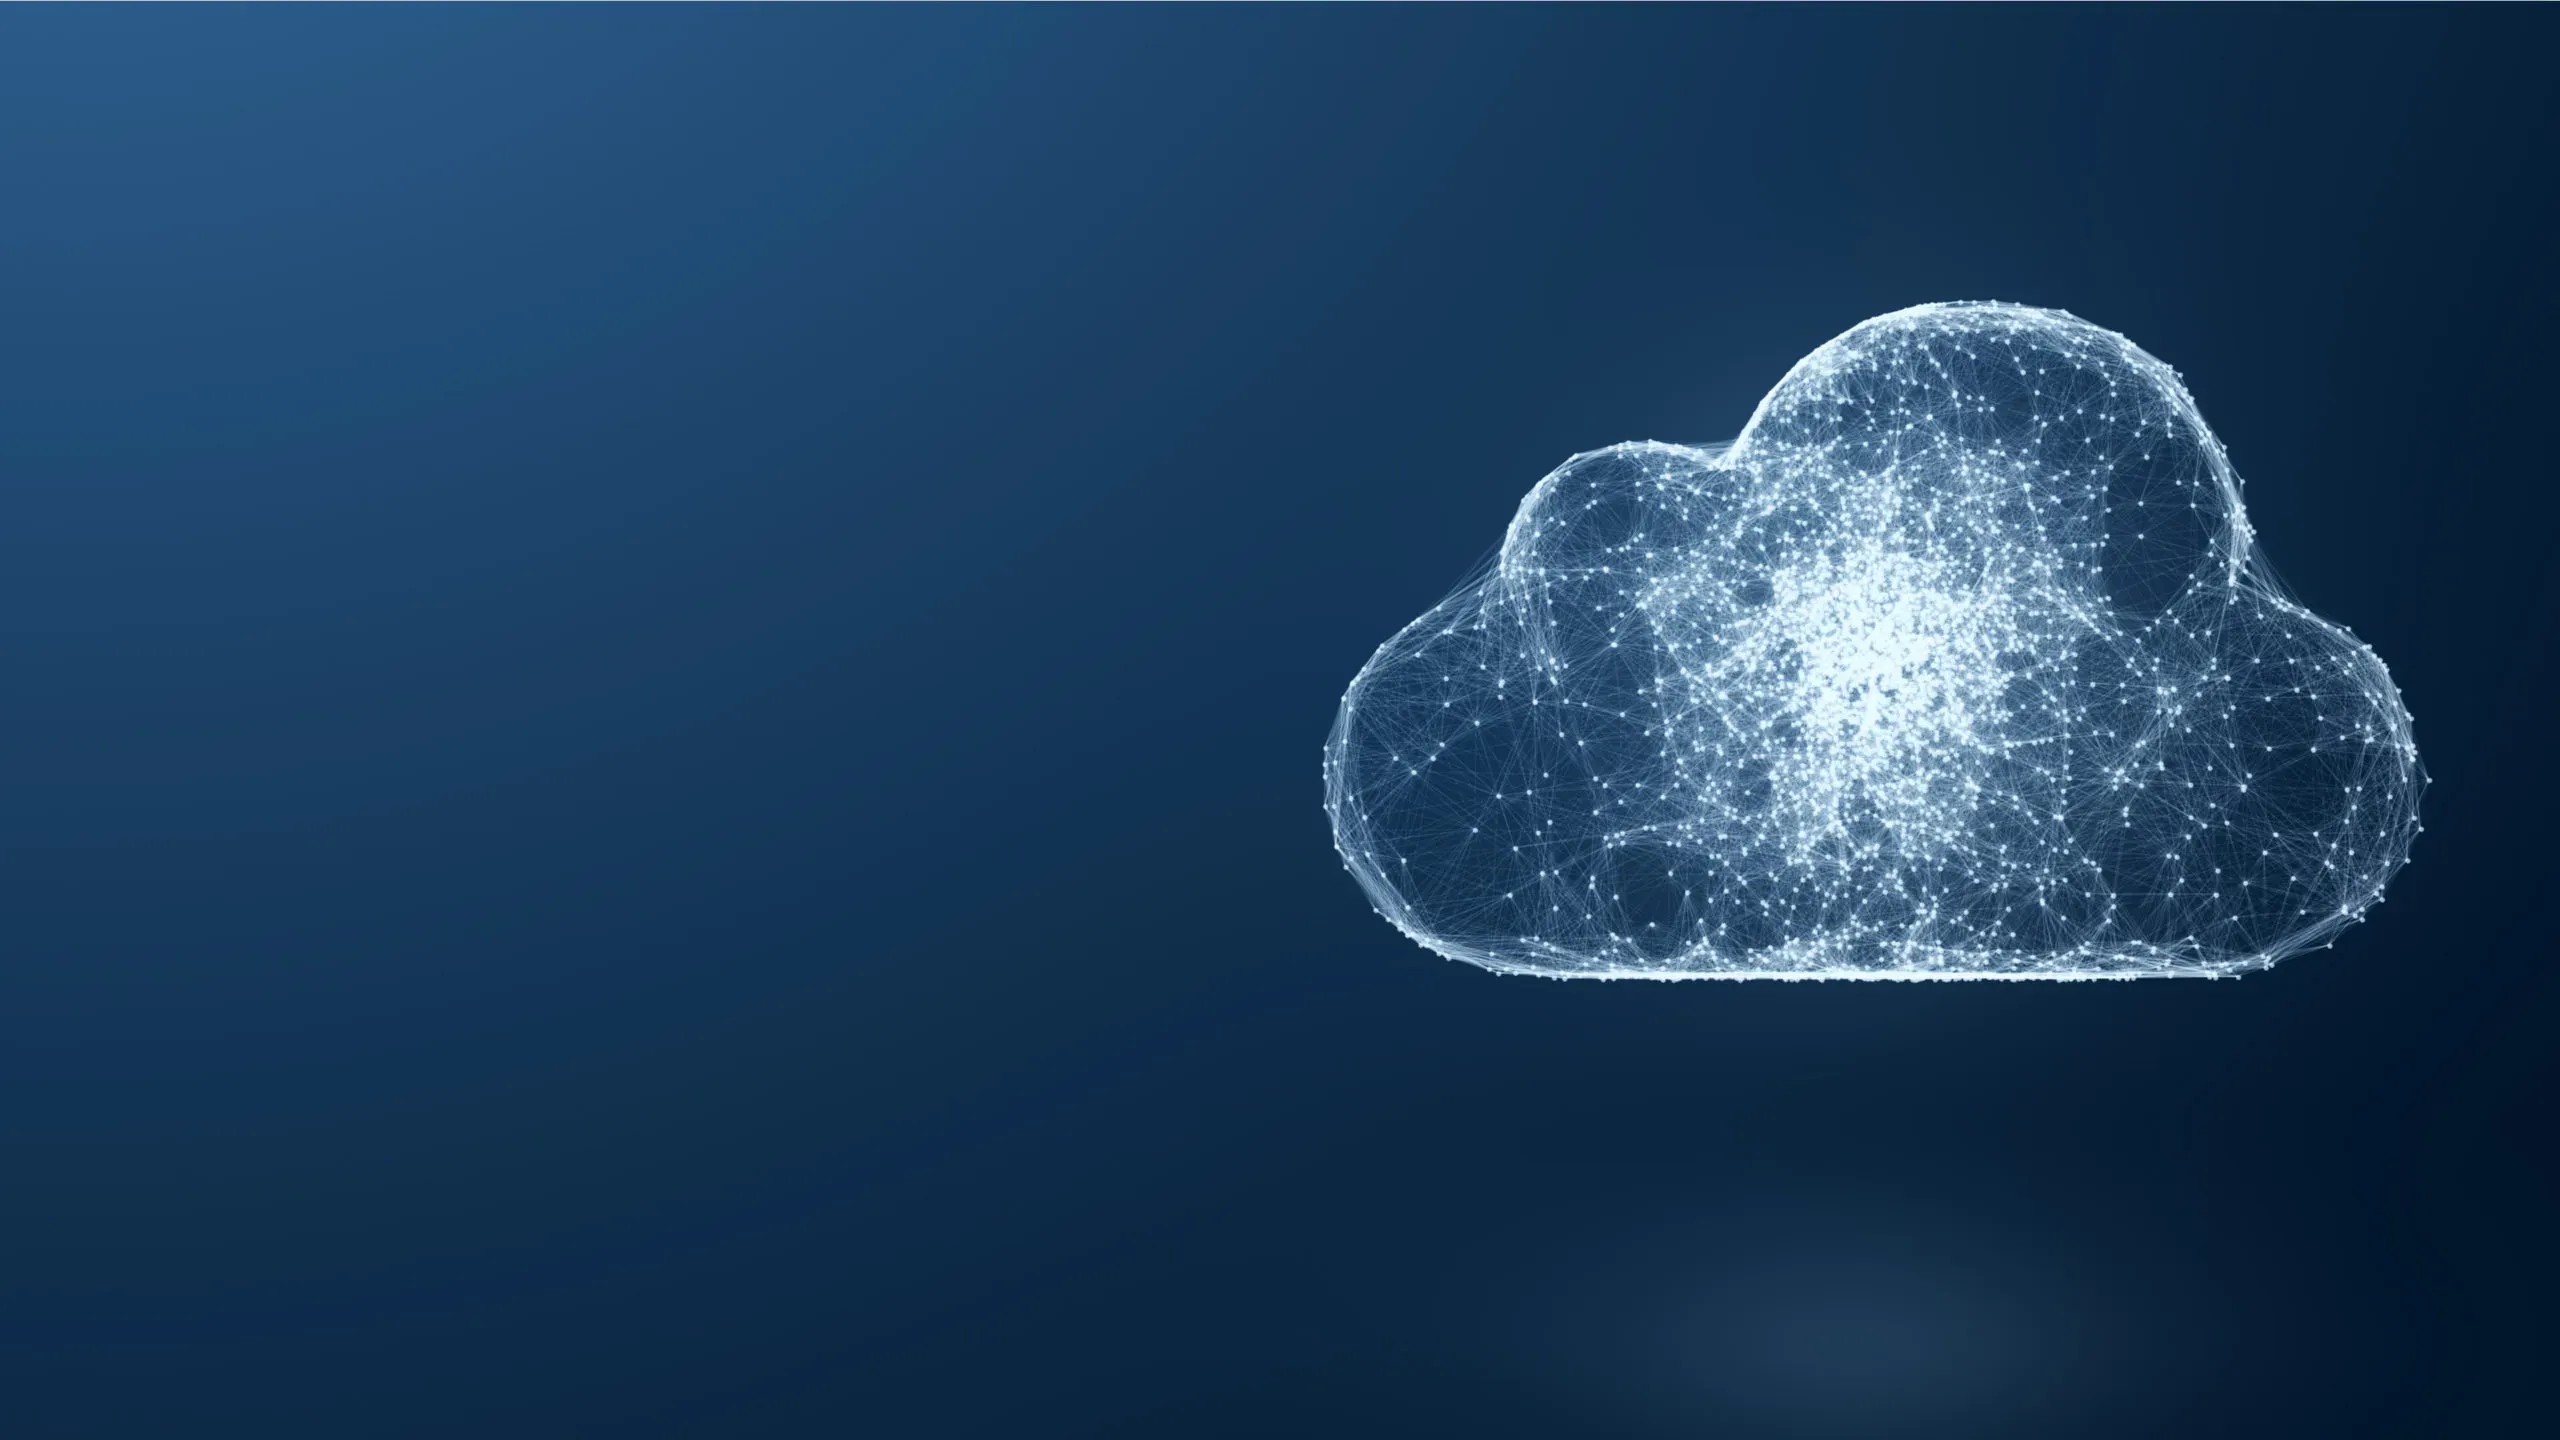 6 Top Considerations as You Evolve Your Cloud Data Management Strategy